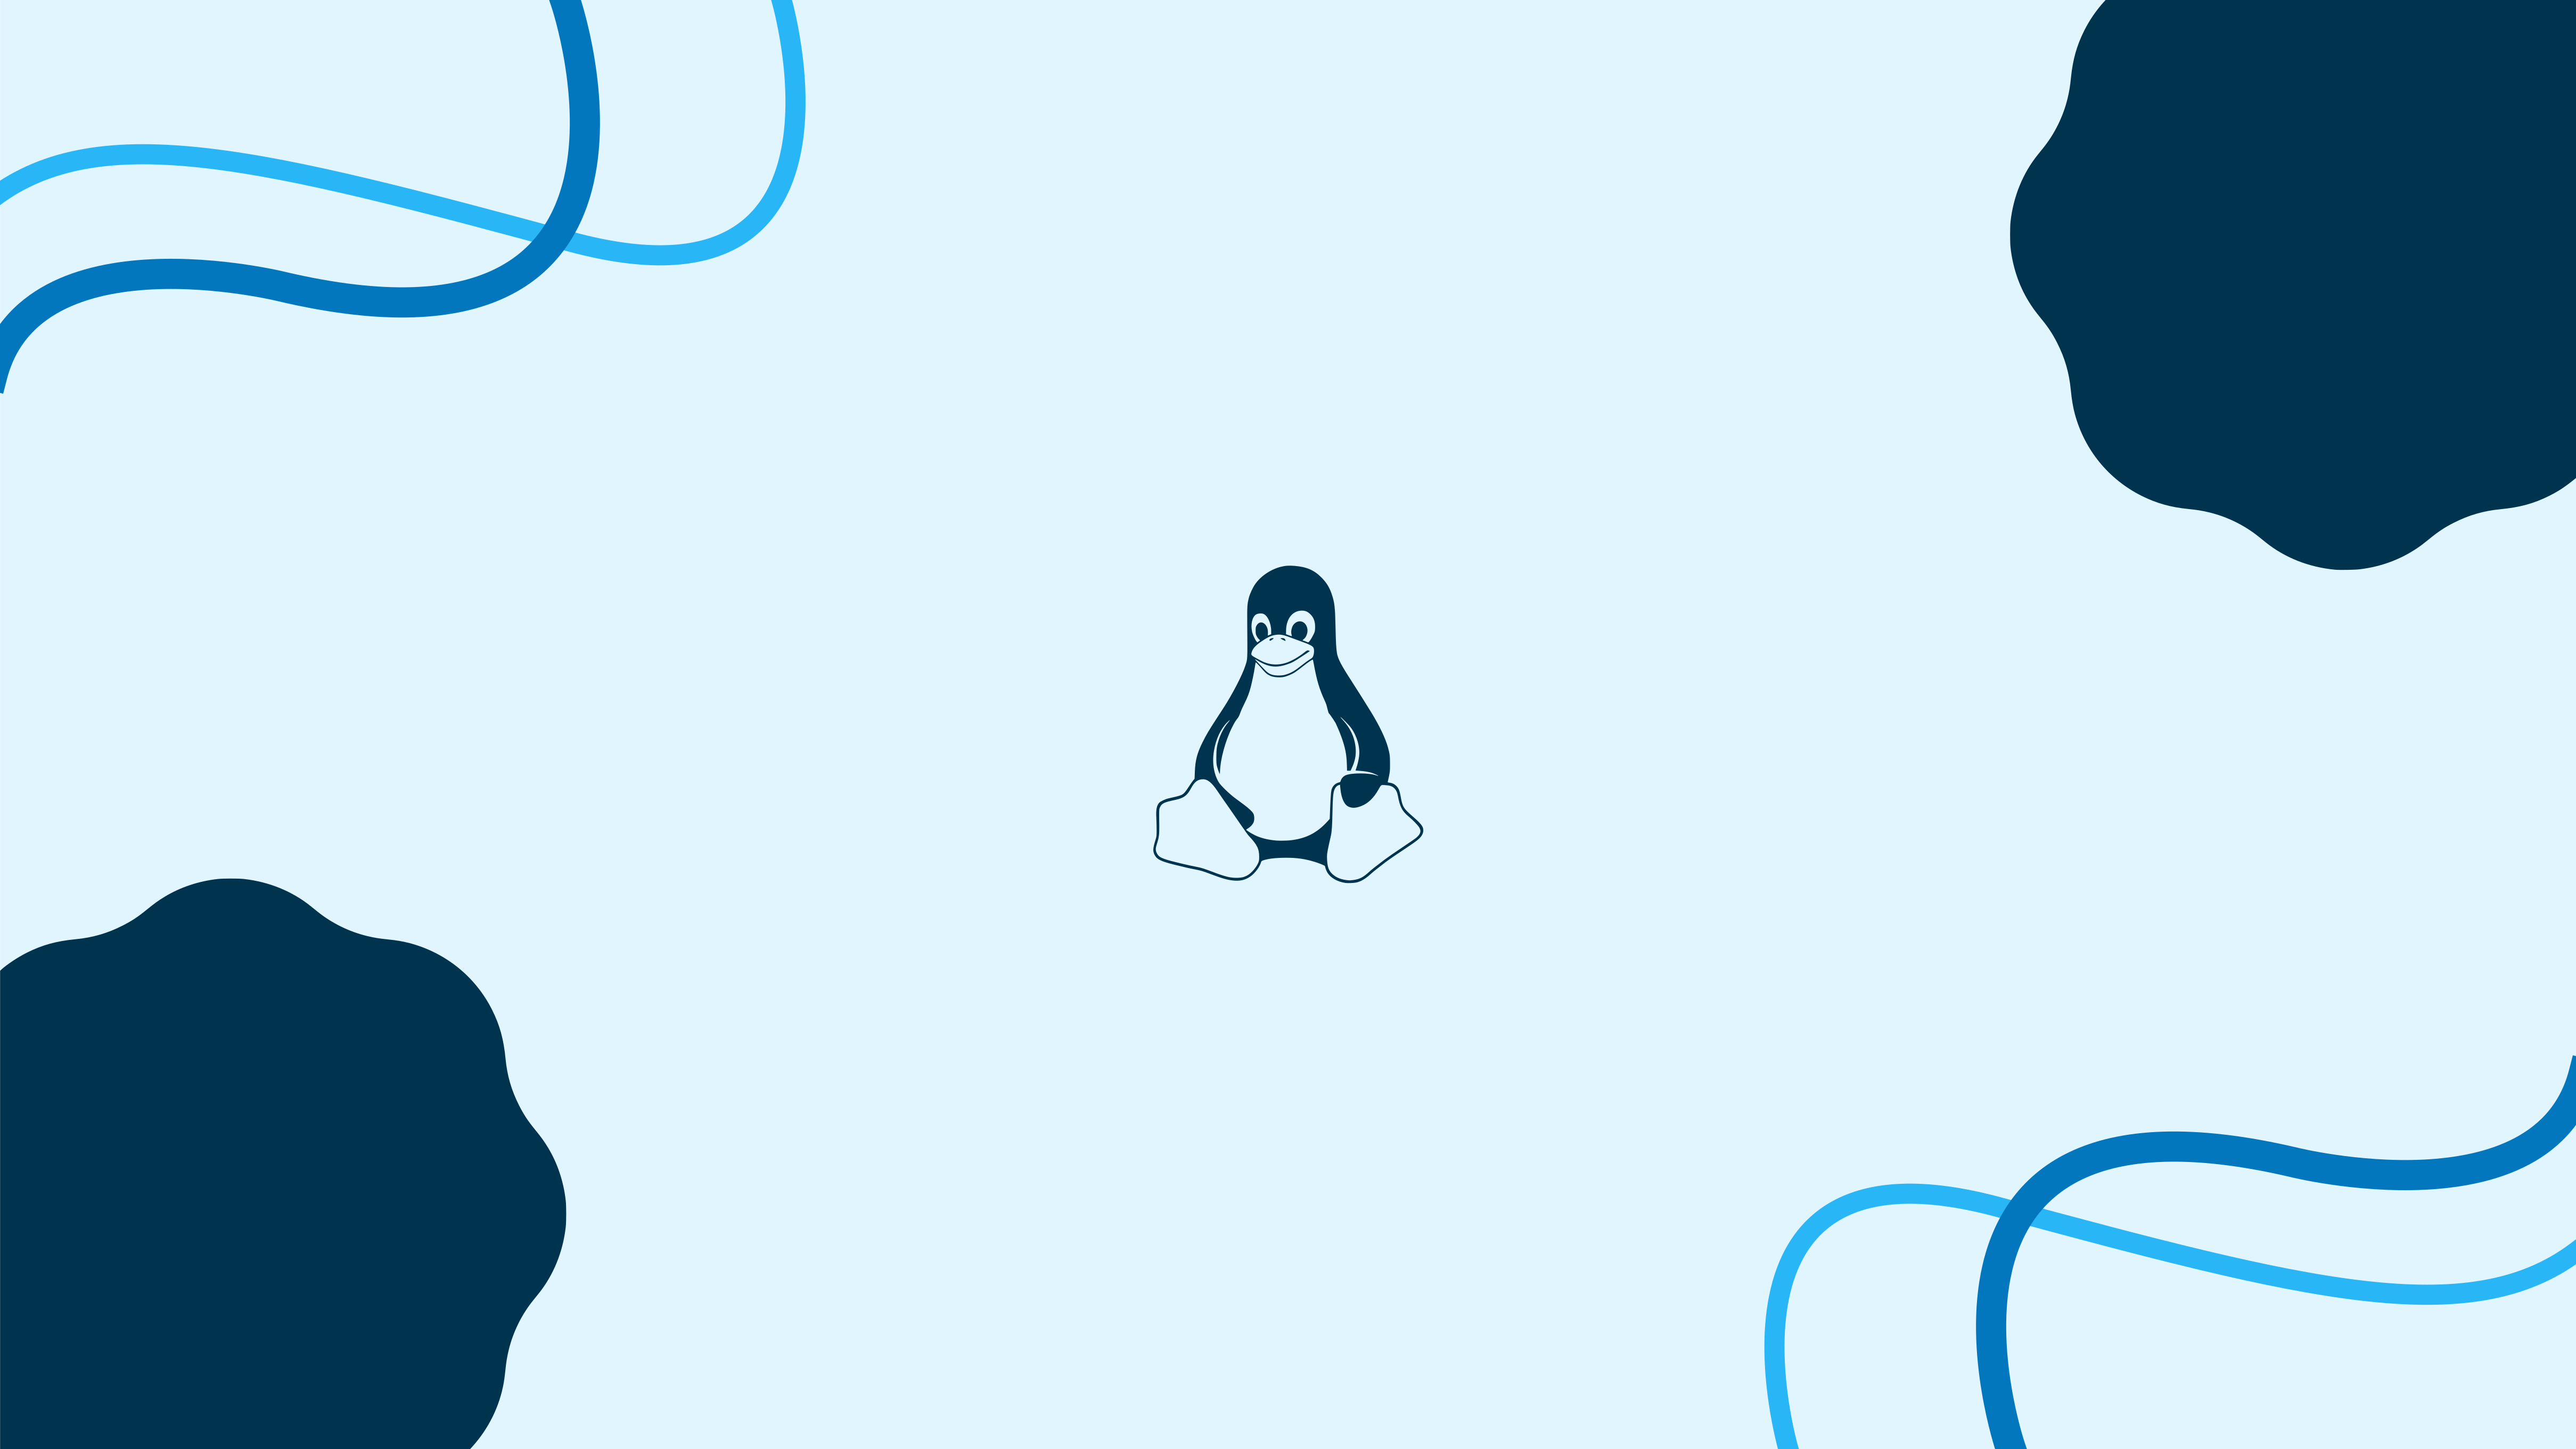 General 4838x2721 Linux unixporn minimalism material minimal material style light background blue arch Arch Linux Tux GNU operating system penguins simple background digital art